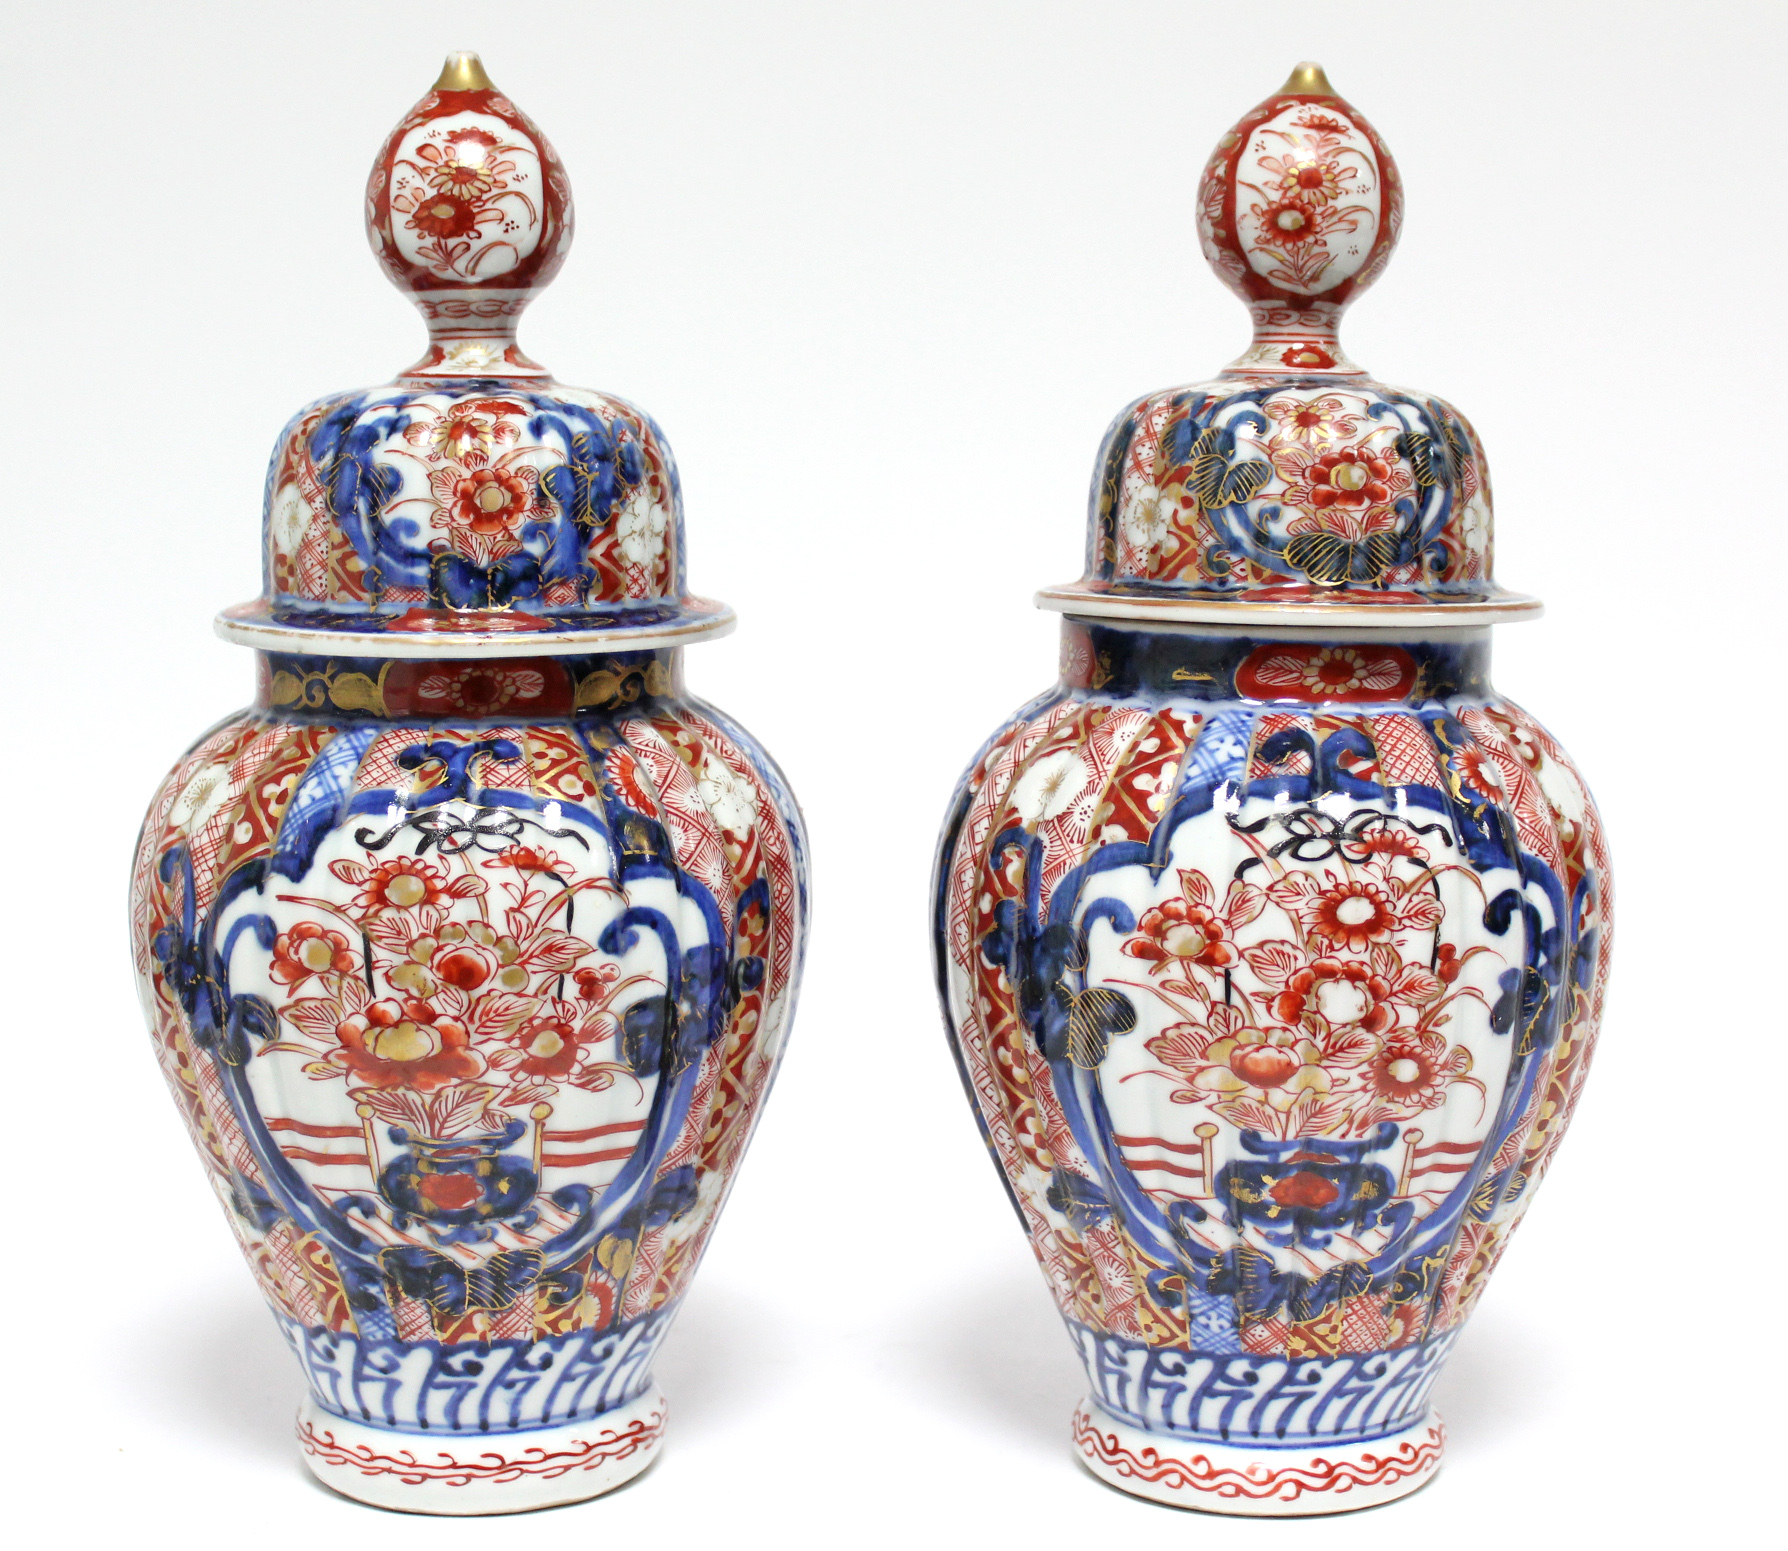 A pair of 19th century Japanese Imari fluted baluster vases with domed covers; 12” high.